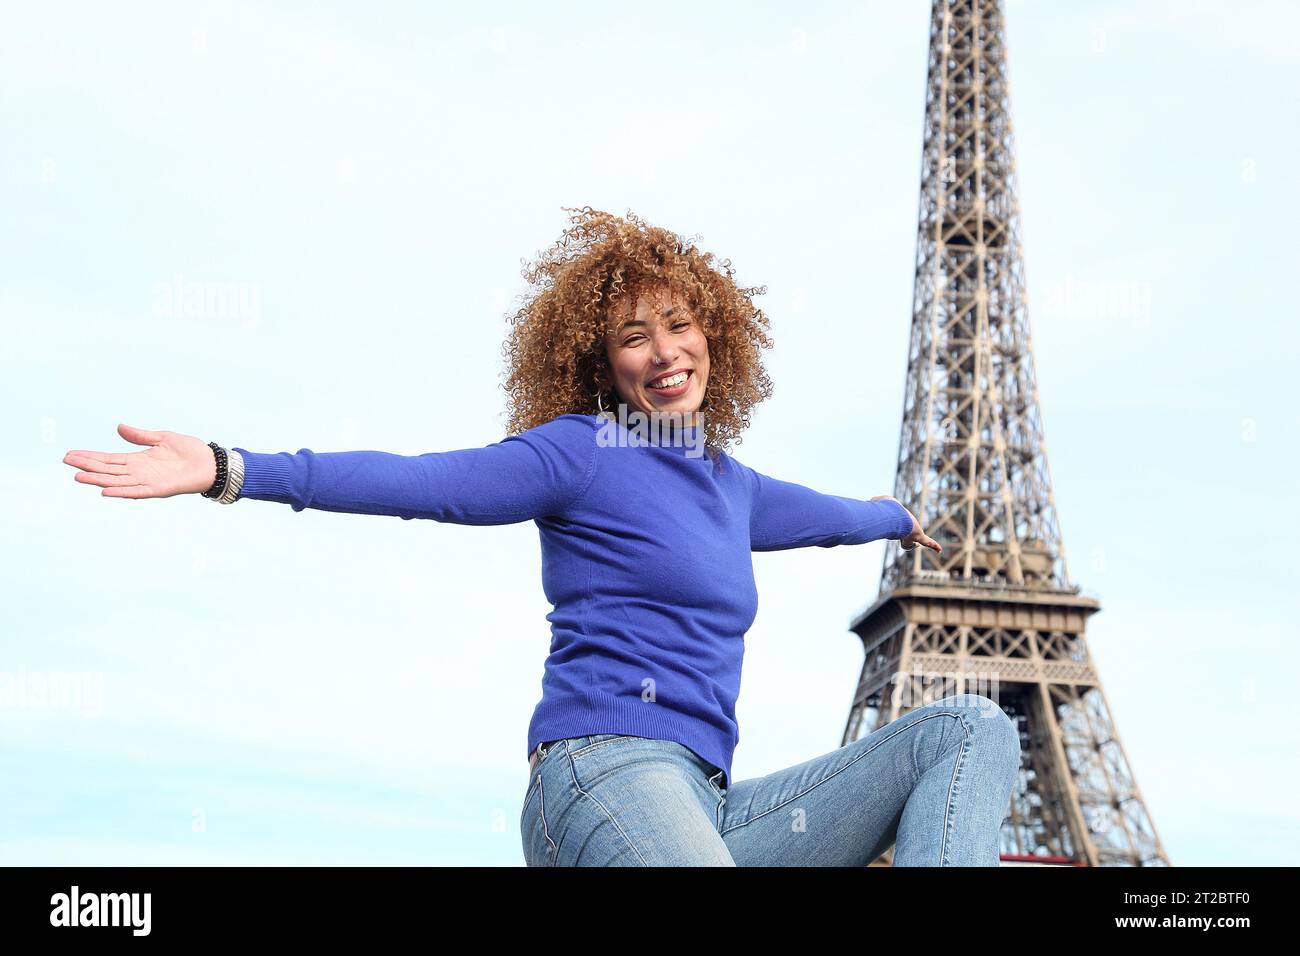 HAPPY CURLY HAIR YOUNG WOMAN IN BLUE SWEATER HAVING A GOOD TIME AT THE EIFFEL TOWER Stock Photo